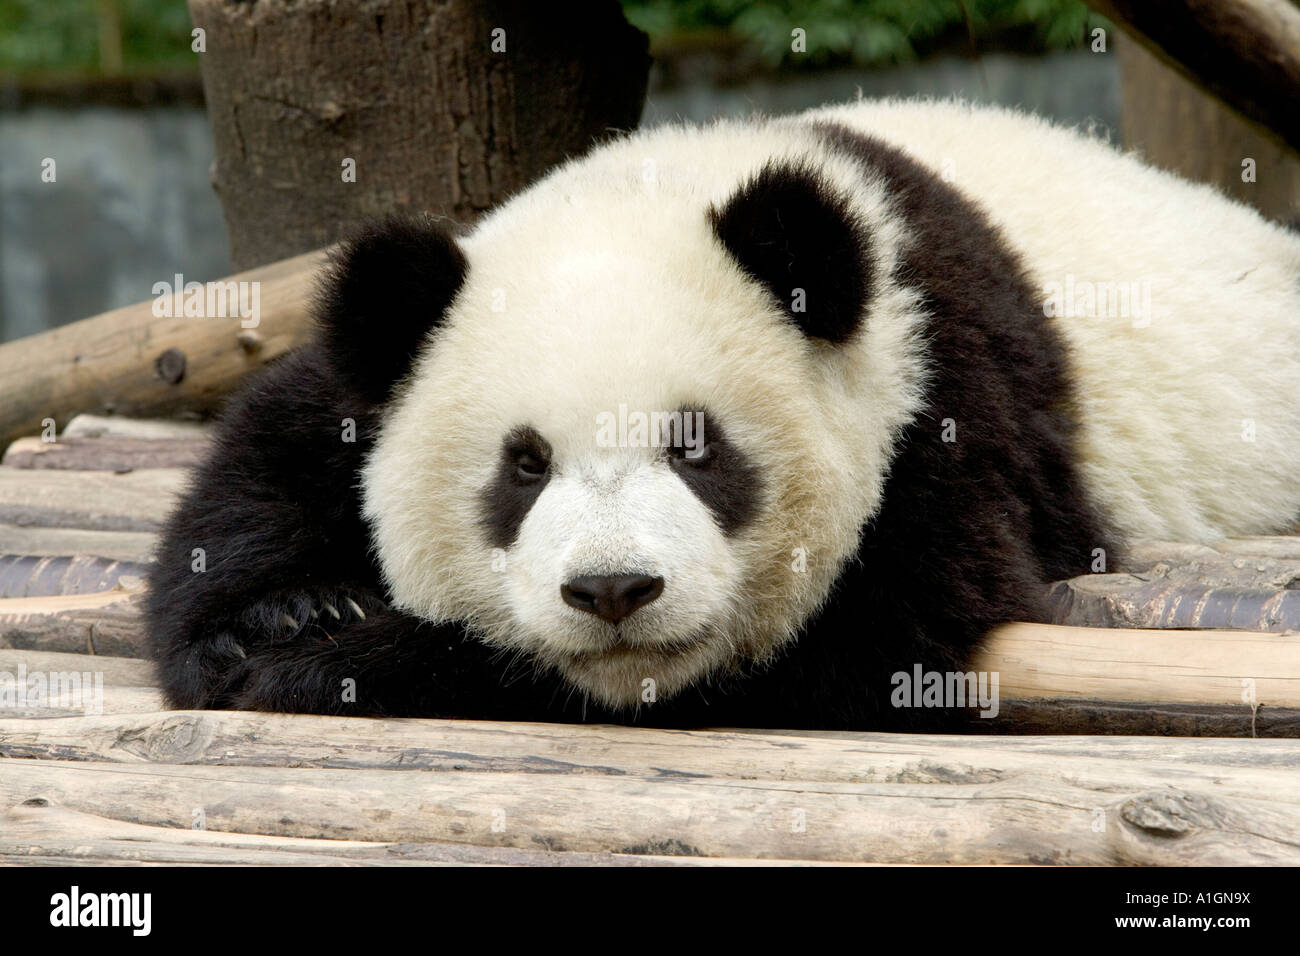 Giant Panda juvenile resting in play area, Wolong Nature Reserve, China Stock Photo